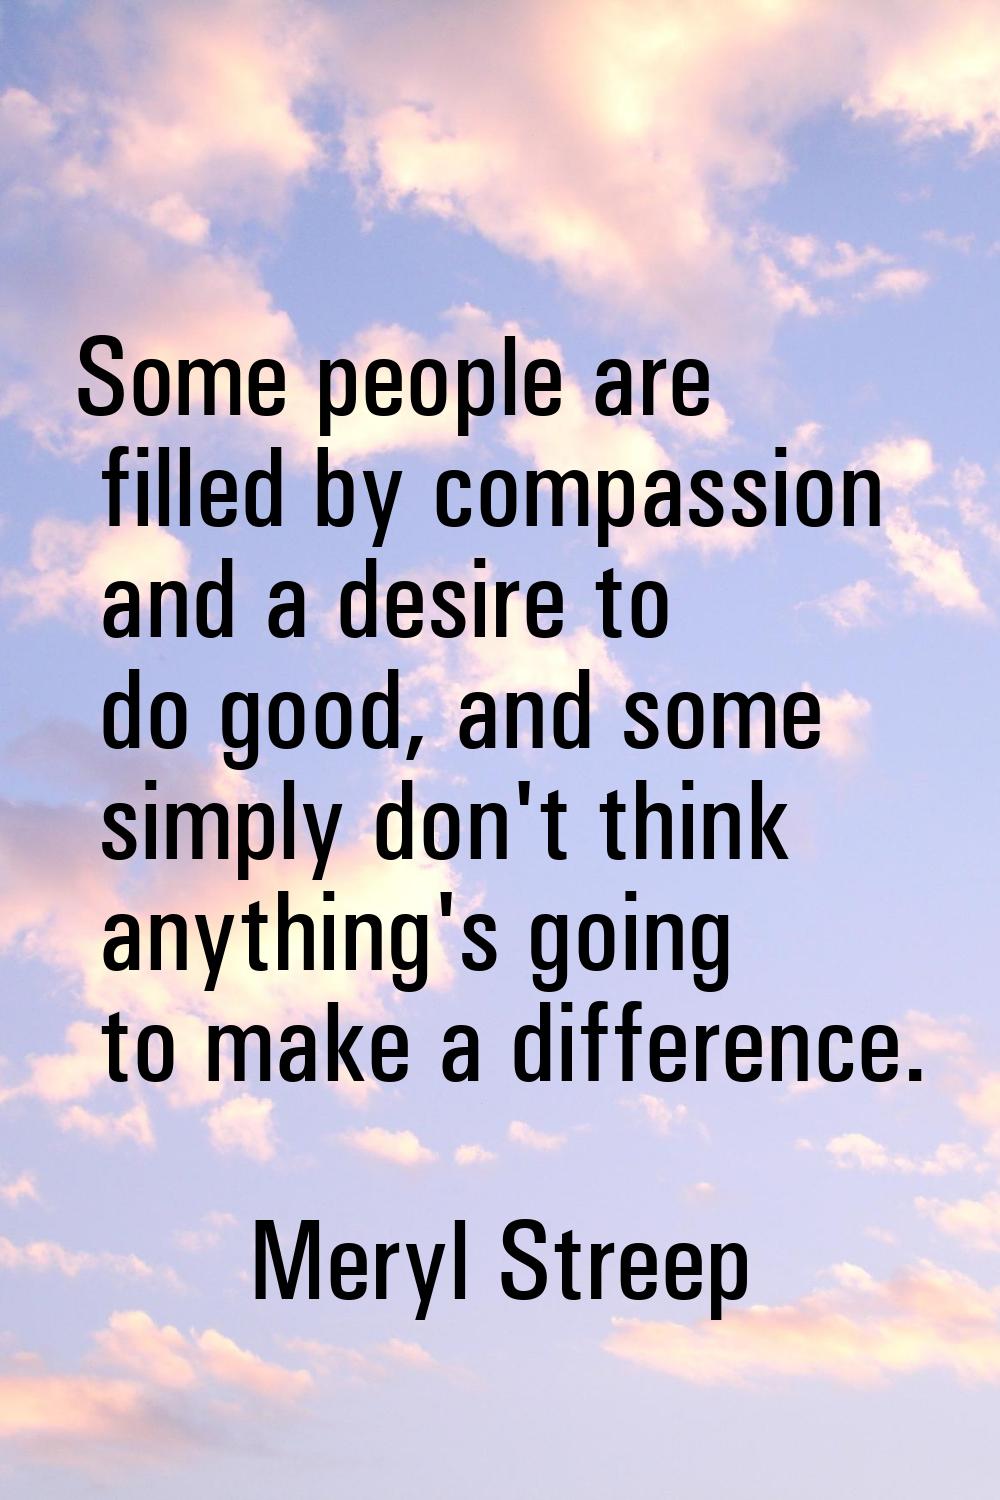 Some people are filled by compassion and a desire to do good, and some simply don't think anything'